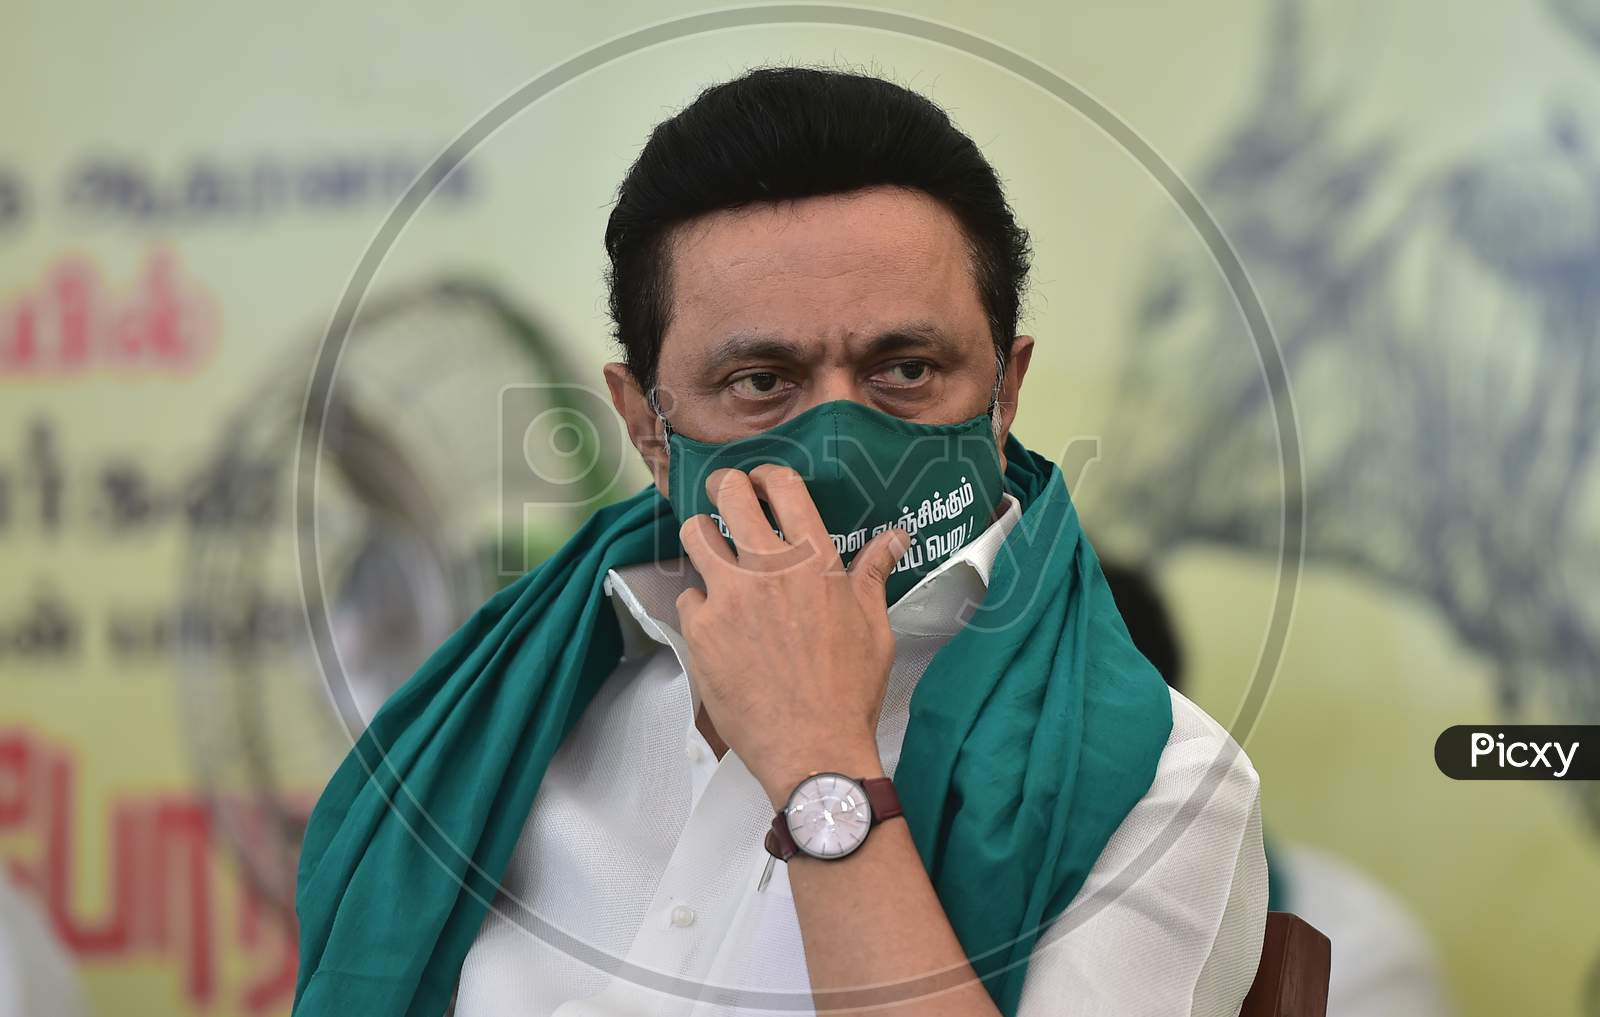 Dravida Munnetra Kazhagam (Dmk) Party President M.K. Stalin, Gestures As Opposition Parties Stage A One Day Fasting Protest Against The Recent Agricultural Reforms, In Chennai On December 18, 2020.